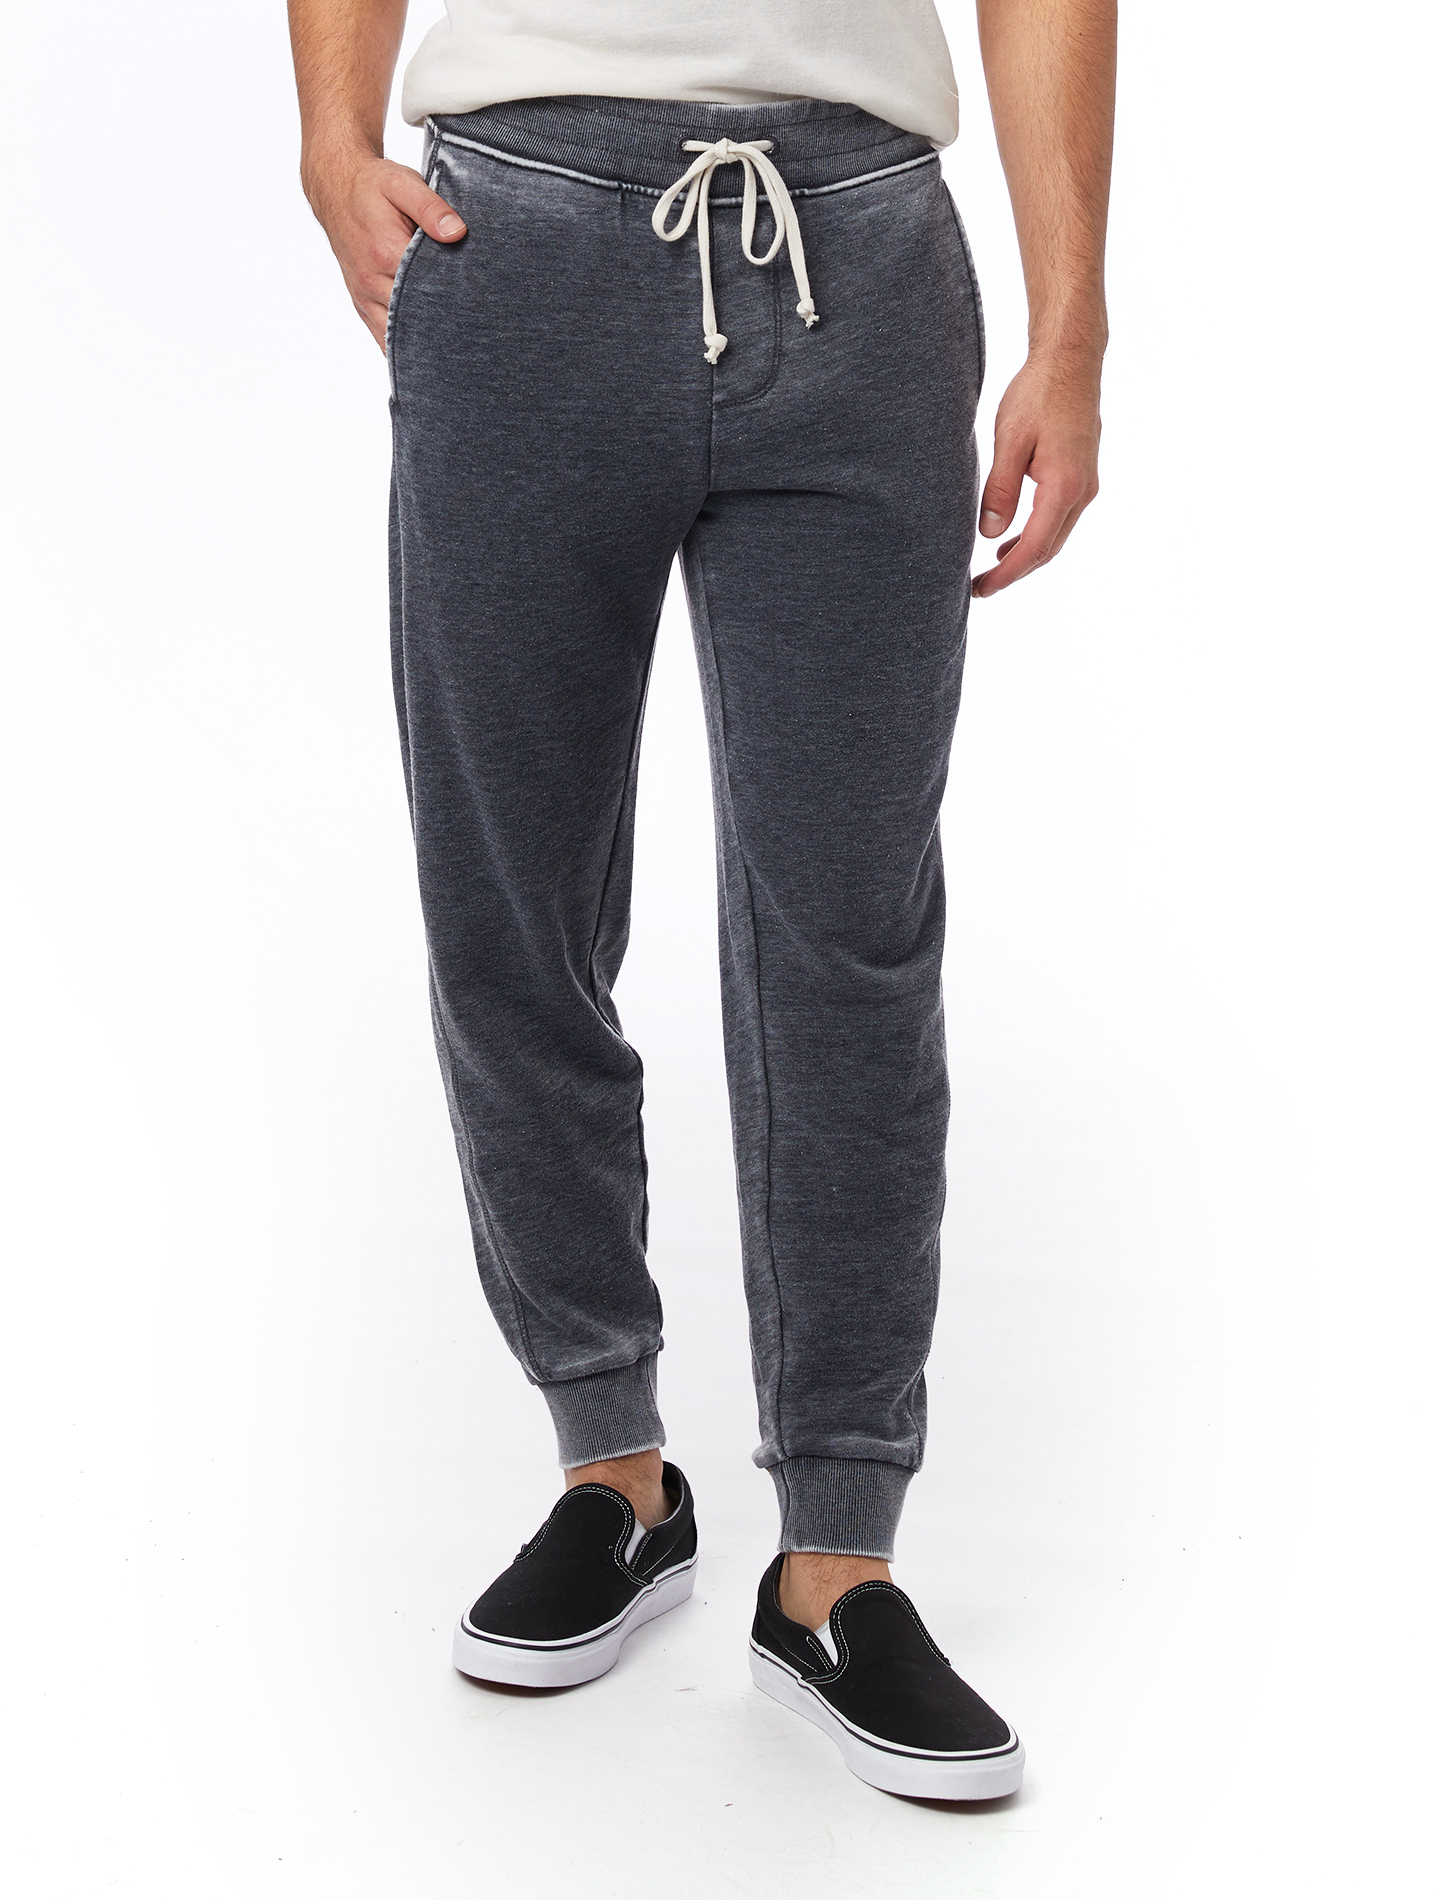 Campus Joggers - Washed Black - The Boutique Lounge